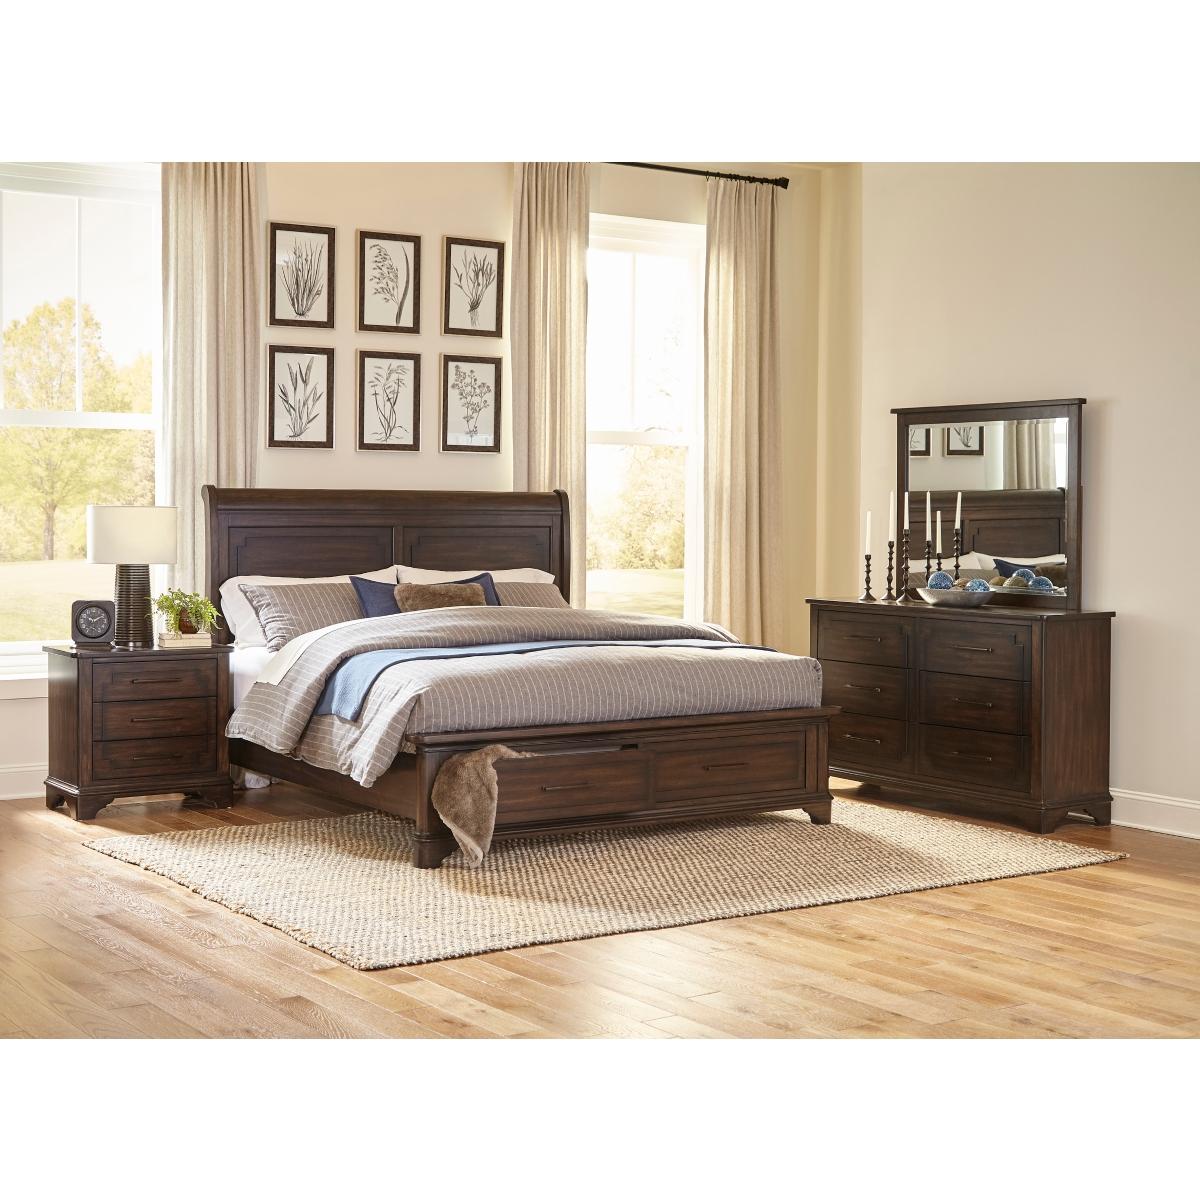 Traditional Bedroom Set 1406-1*3PC 1406-1*3PC in Rustic Brown 